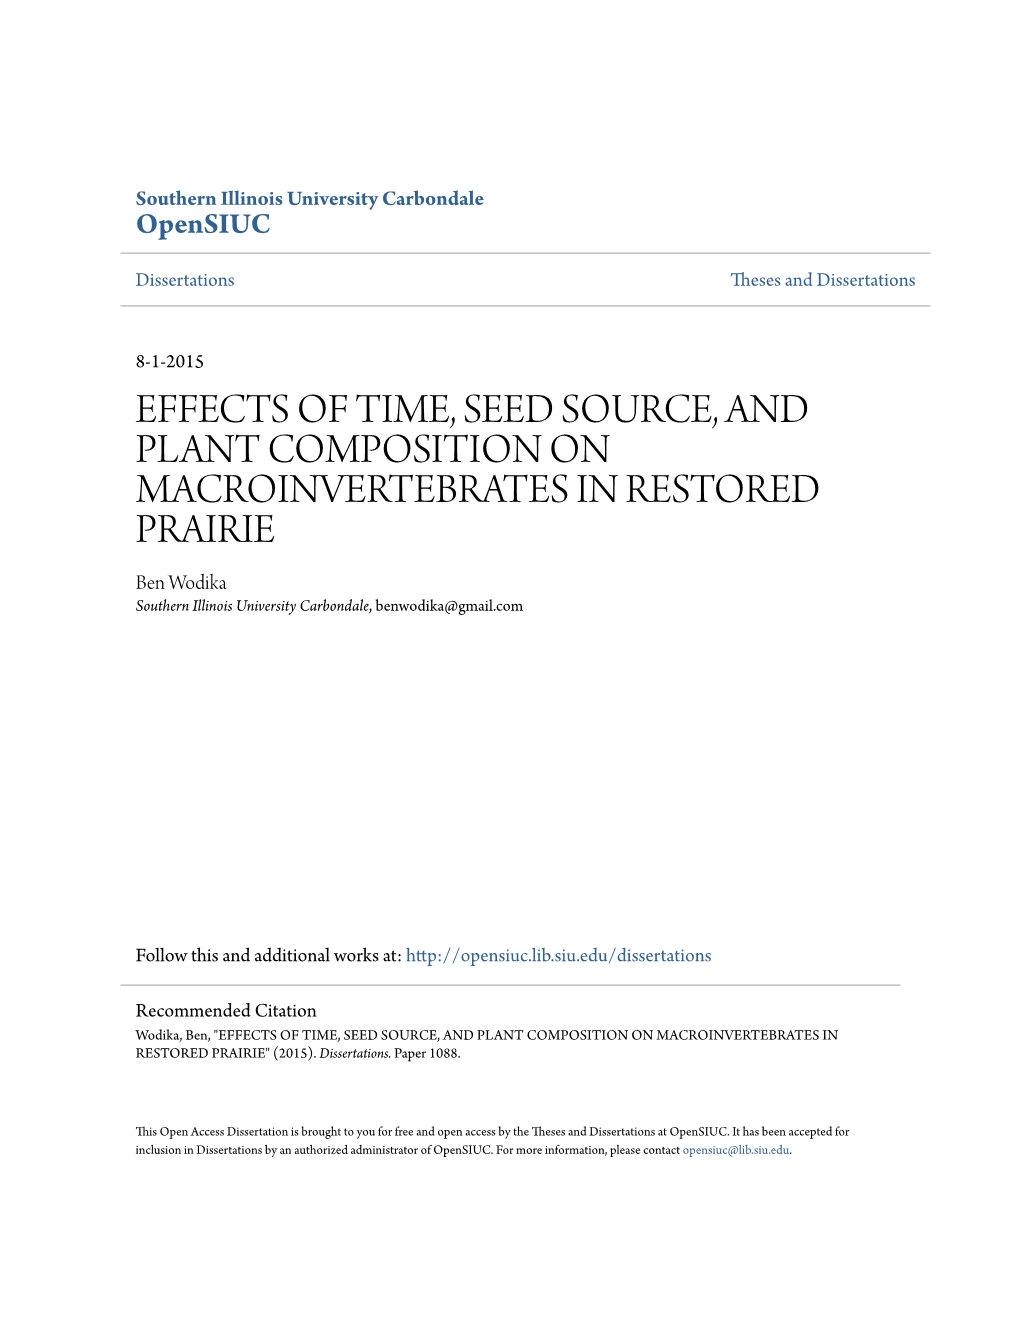 EFFECTS of TIME, SEED SOURCE, and PLANT COMPOSITION on MACROINVERTEBRATES in RESTORED PRAIRIE Ben Wodika Southern Illinois University Carbondale, Benwodika@Gmail.Com